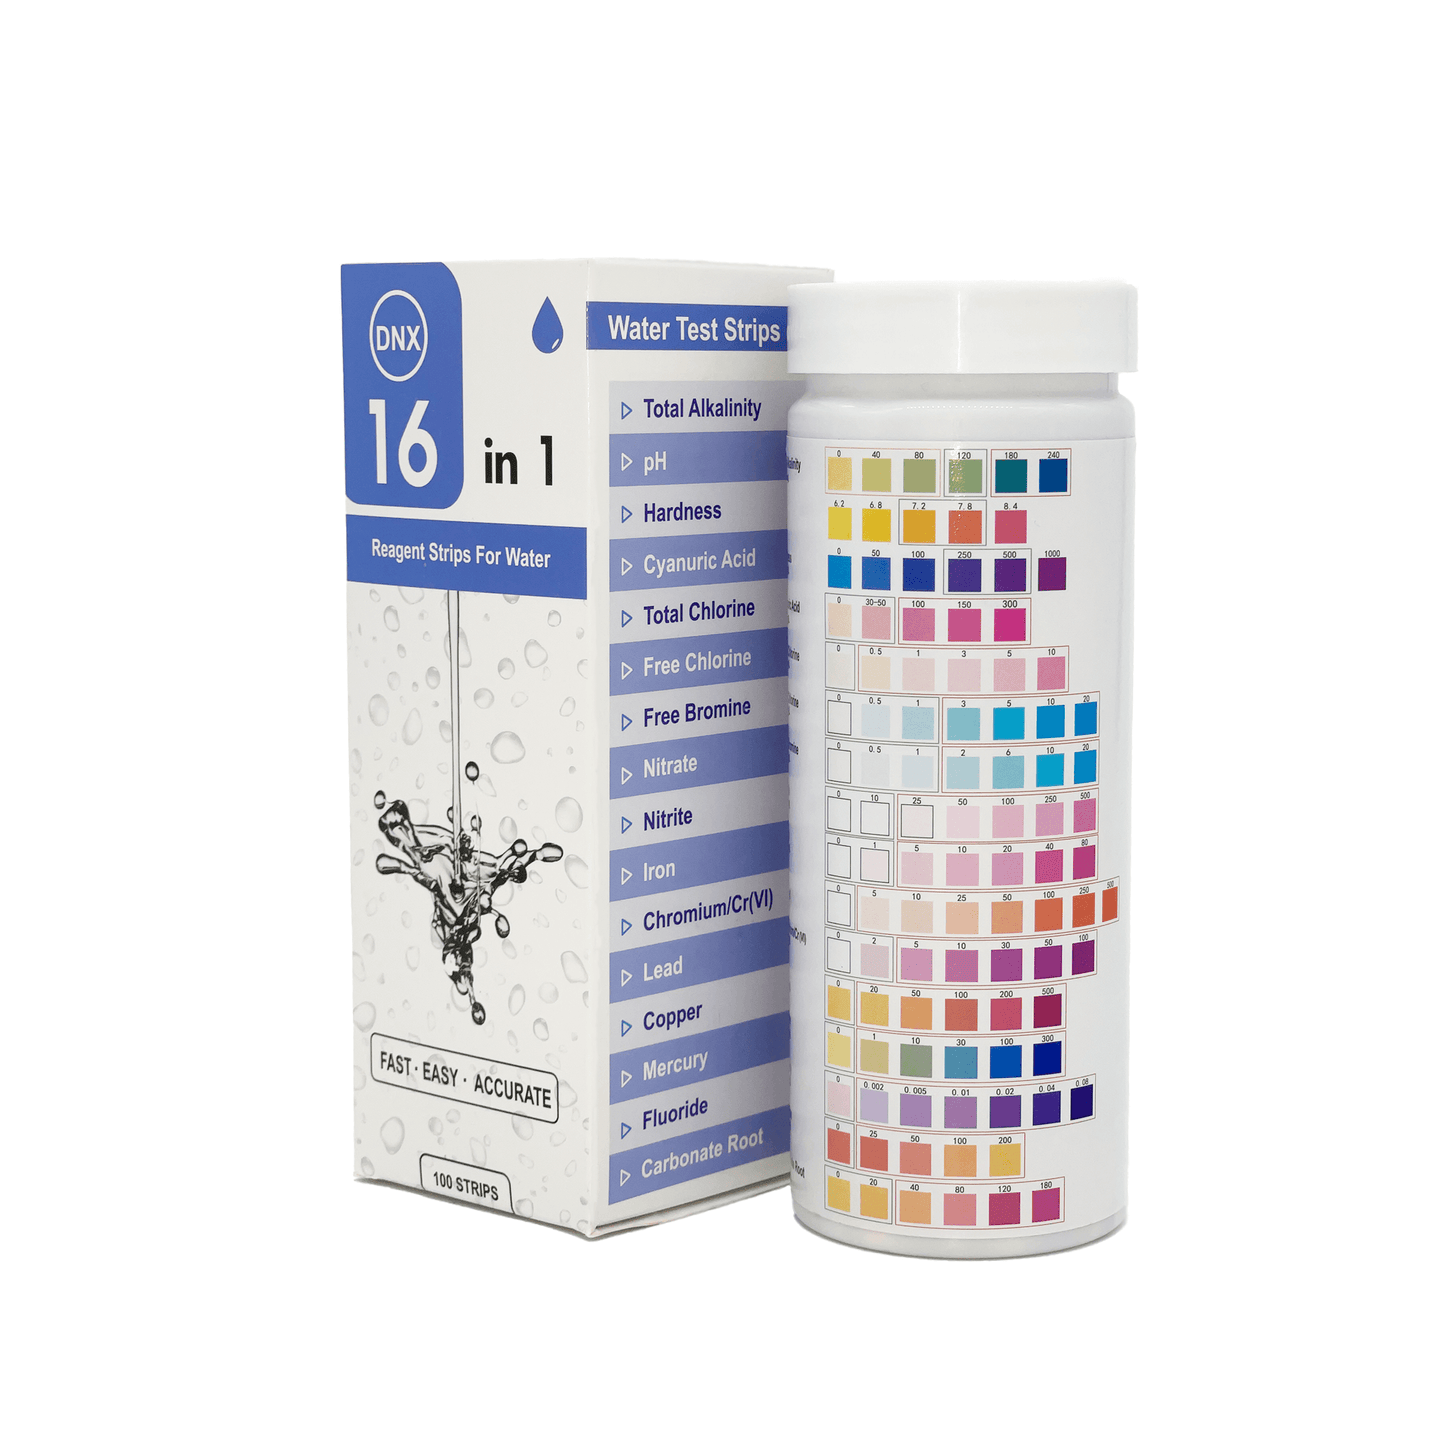 16 in 1 Full Panel Strips for Water Quality Testing - Homedoc